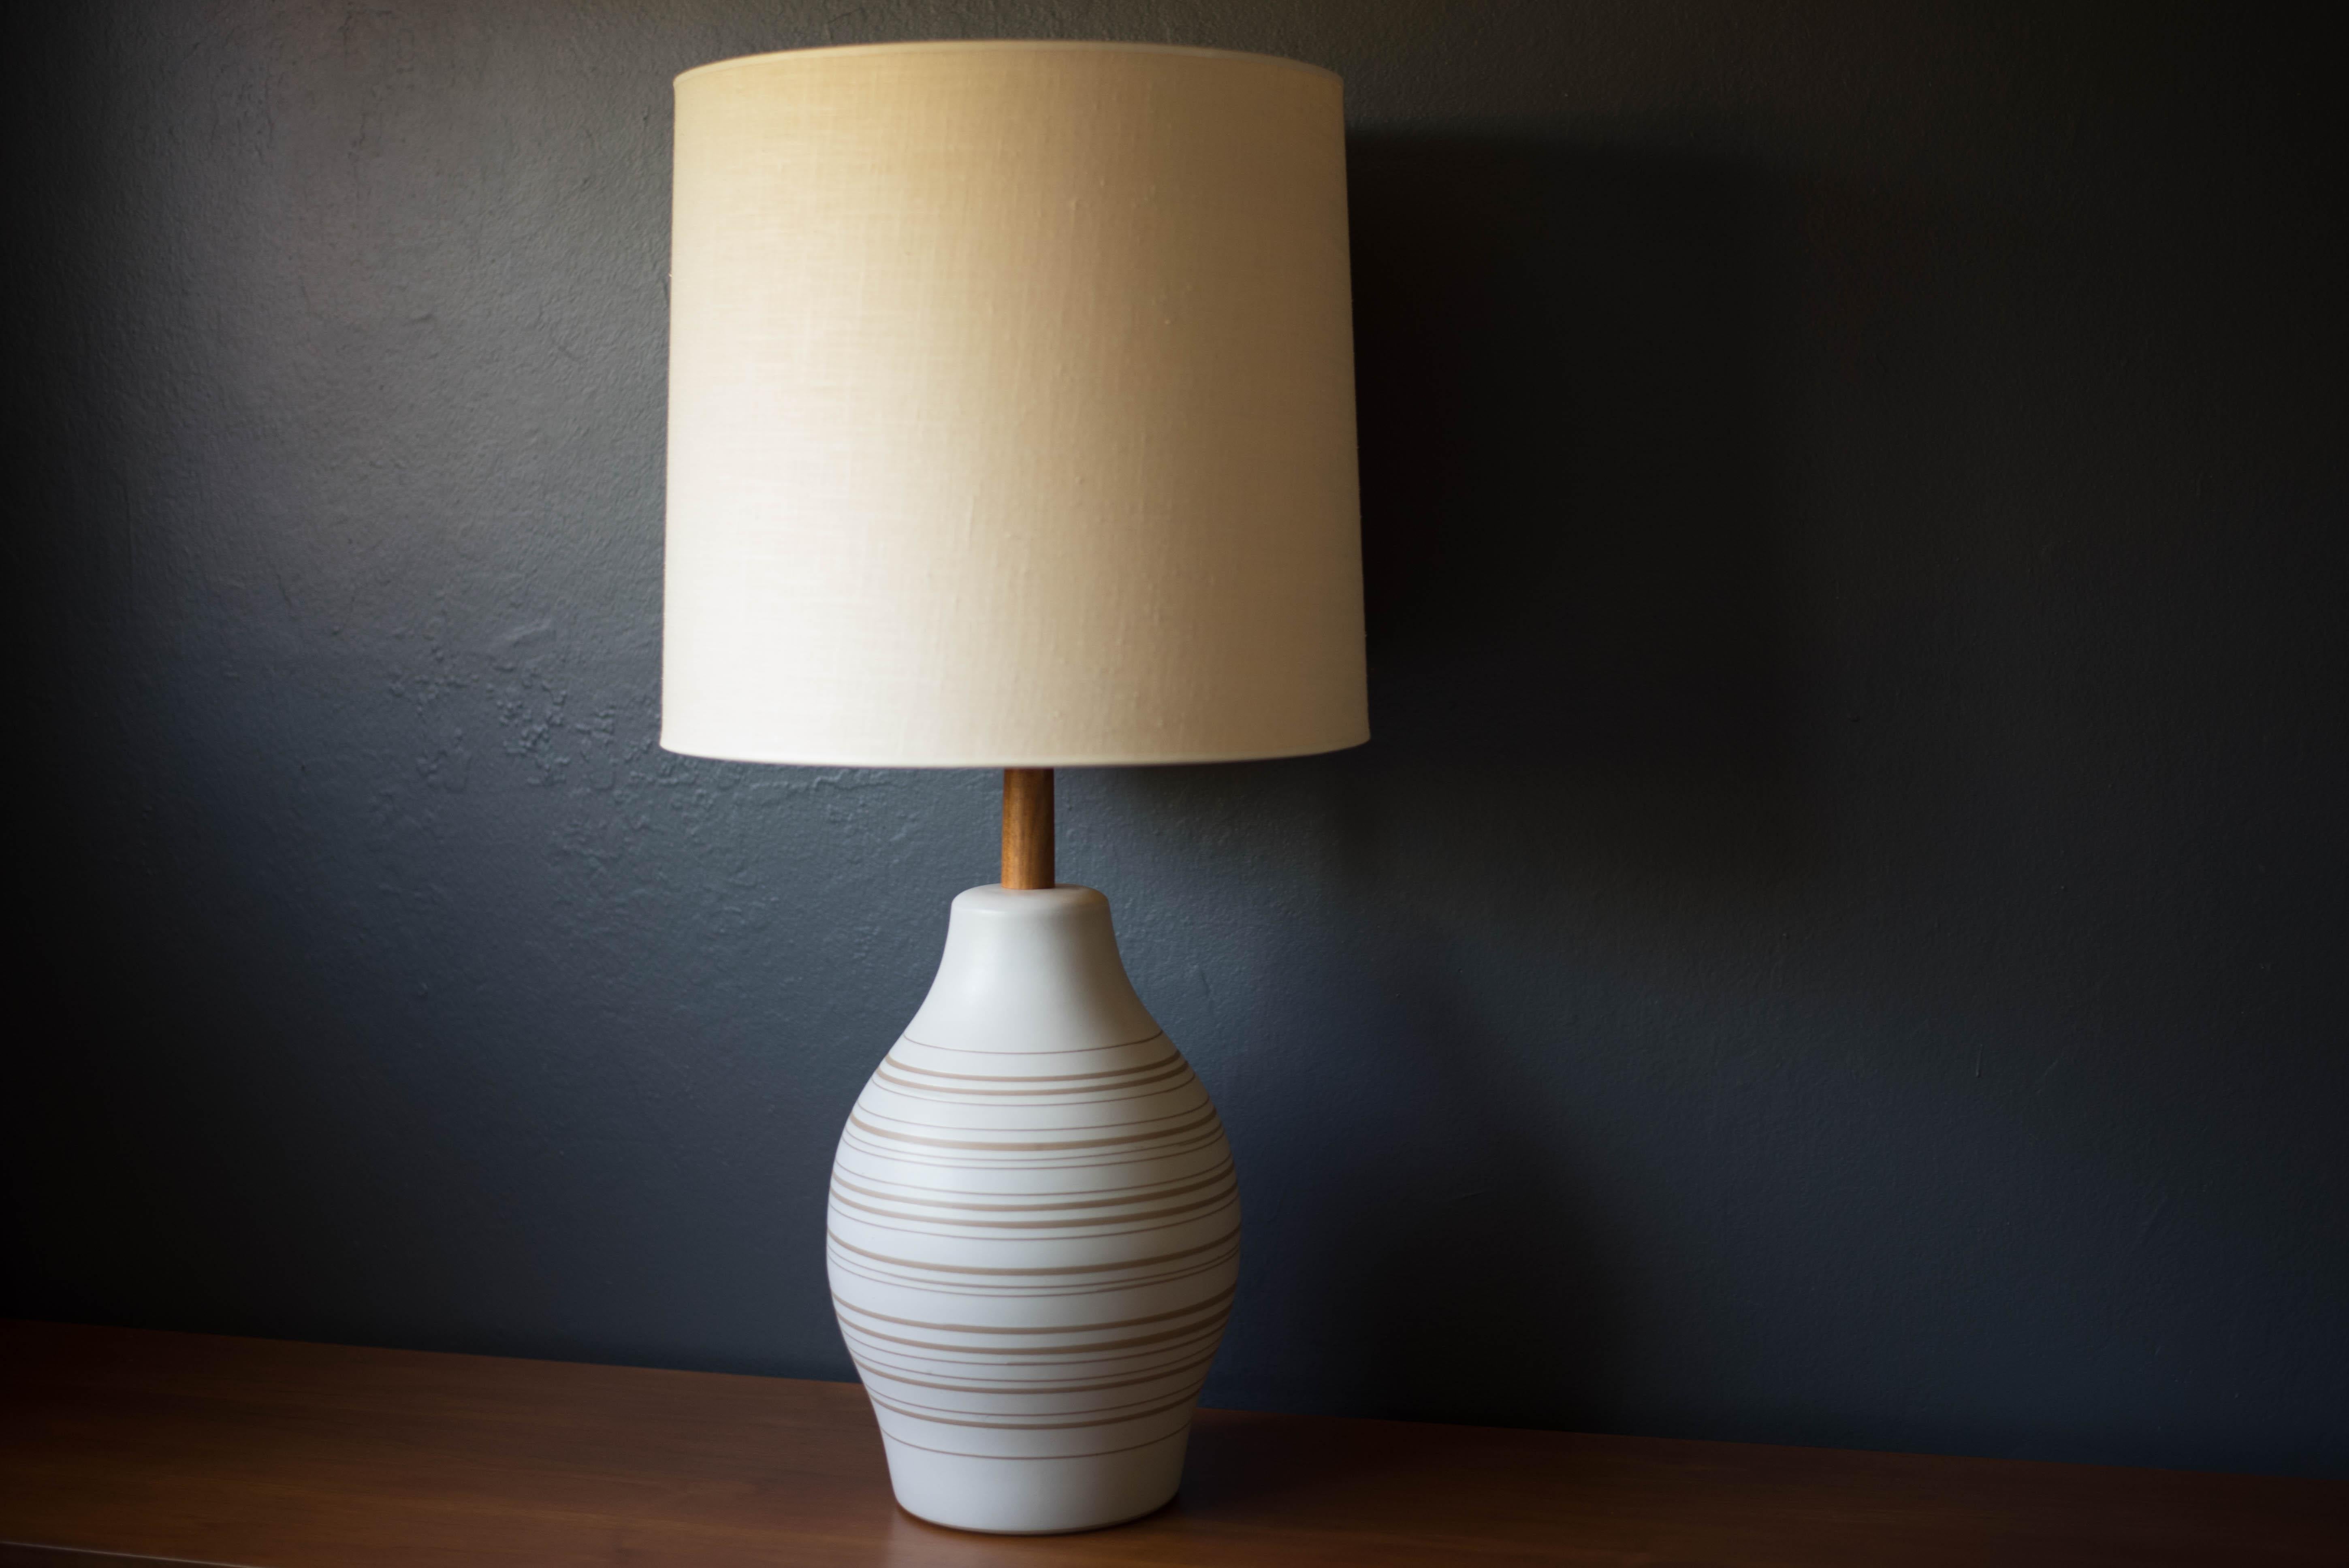 Mid-century sculptural accent table lamp designed by Jane and Gordon Martz for Marshall Studios. This piece features a matte white ceramic base with natural incised lines. Complete with the signature black walnut finial and three-way switch